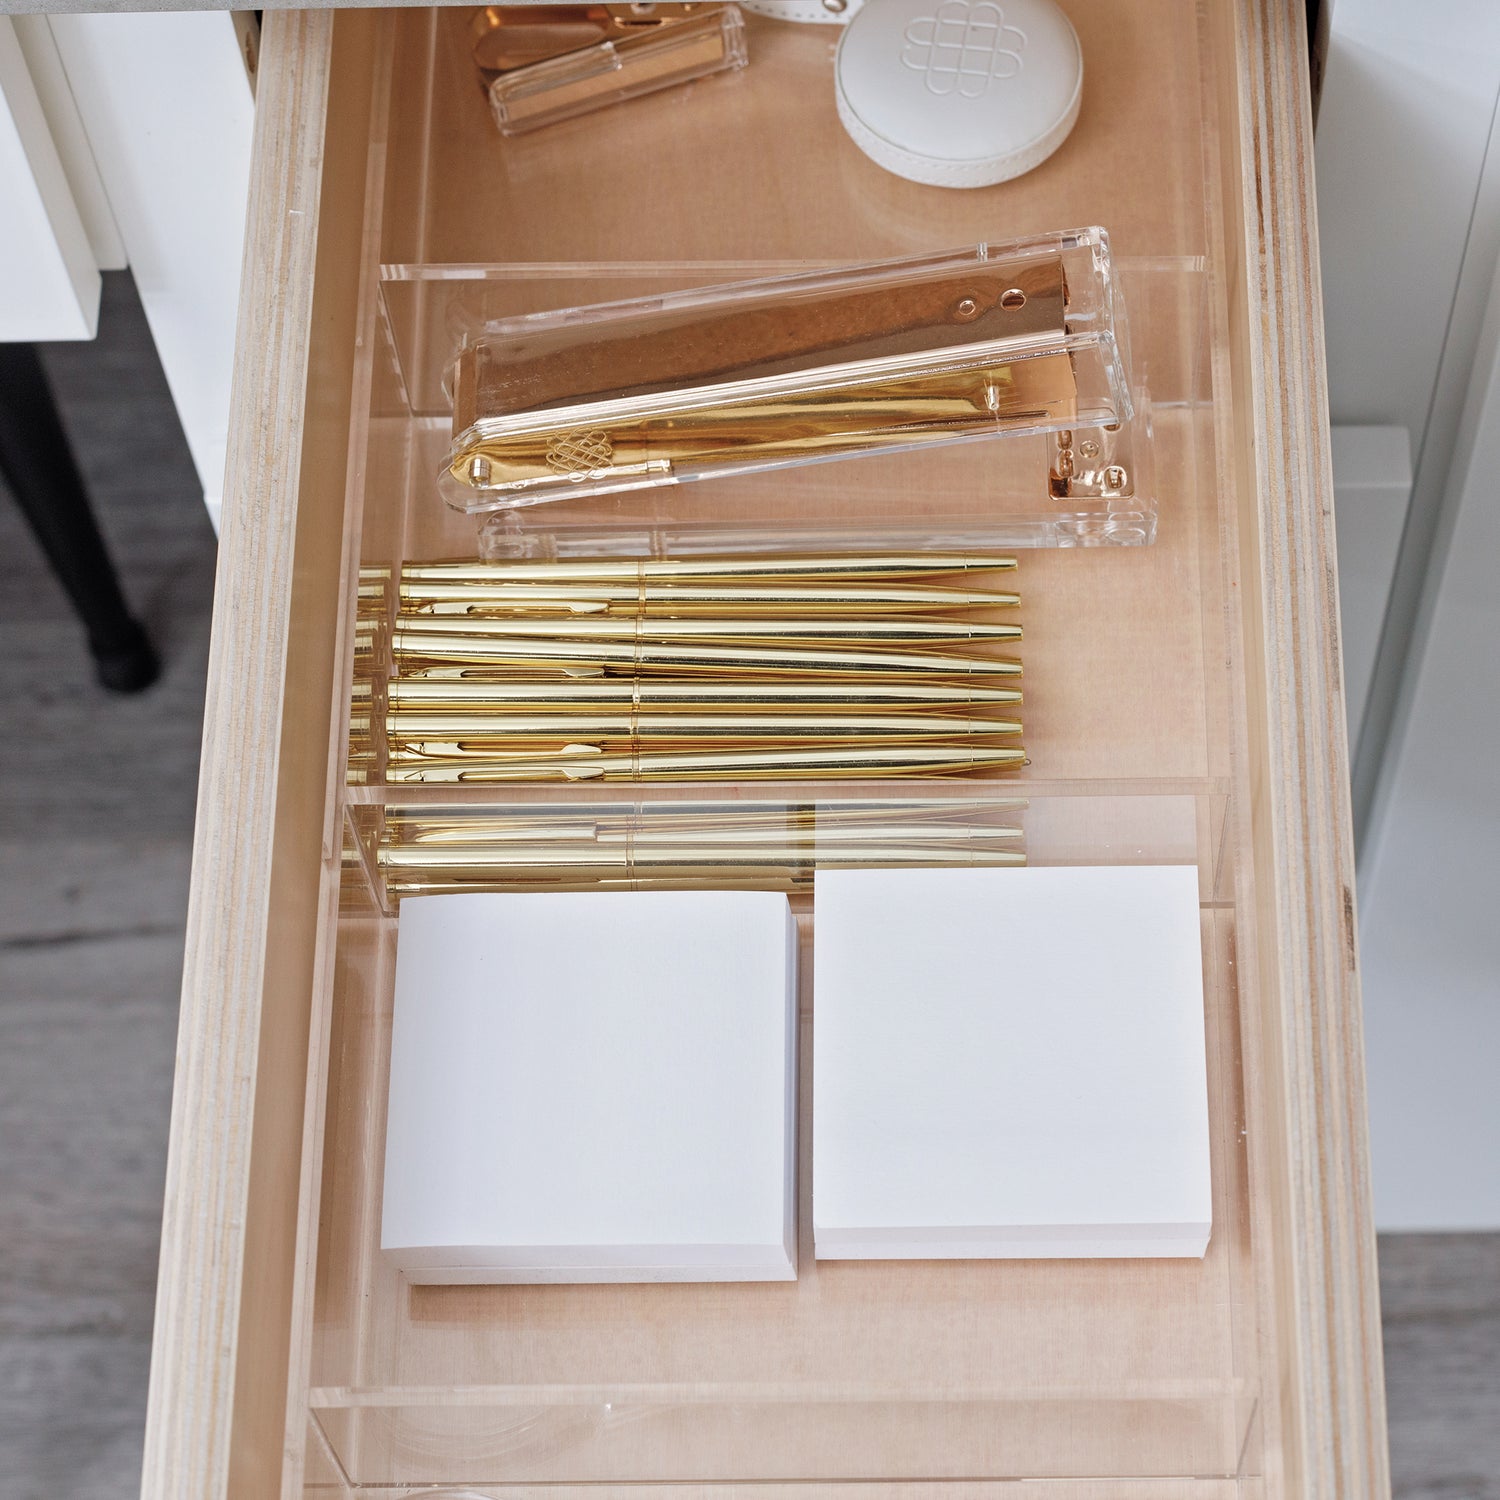 Office products stocked and organized in a drawer with a custom-fit organizer.